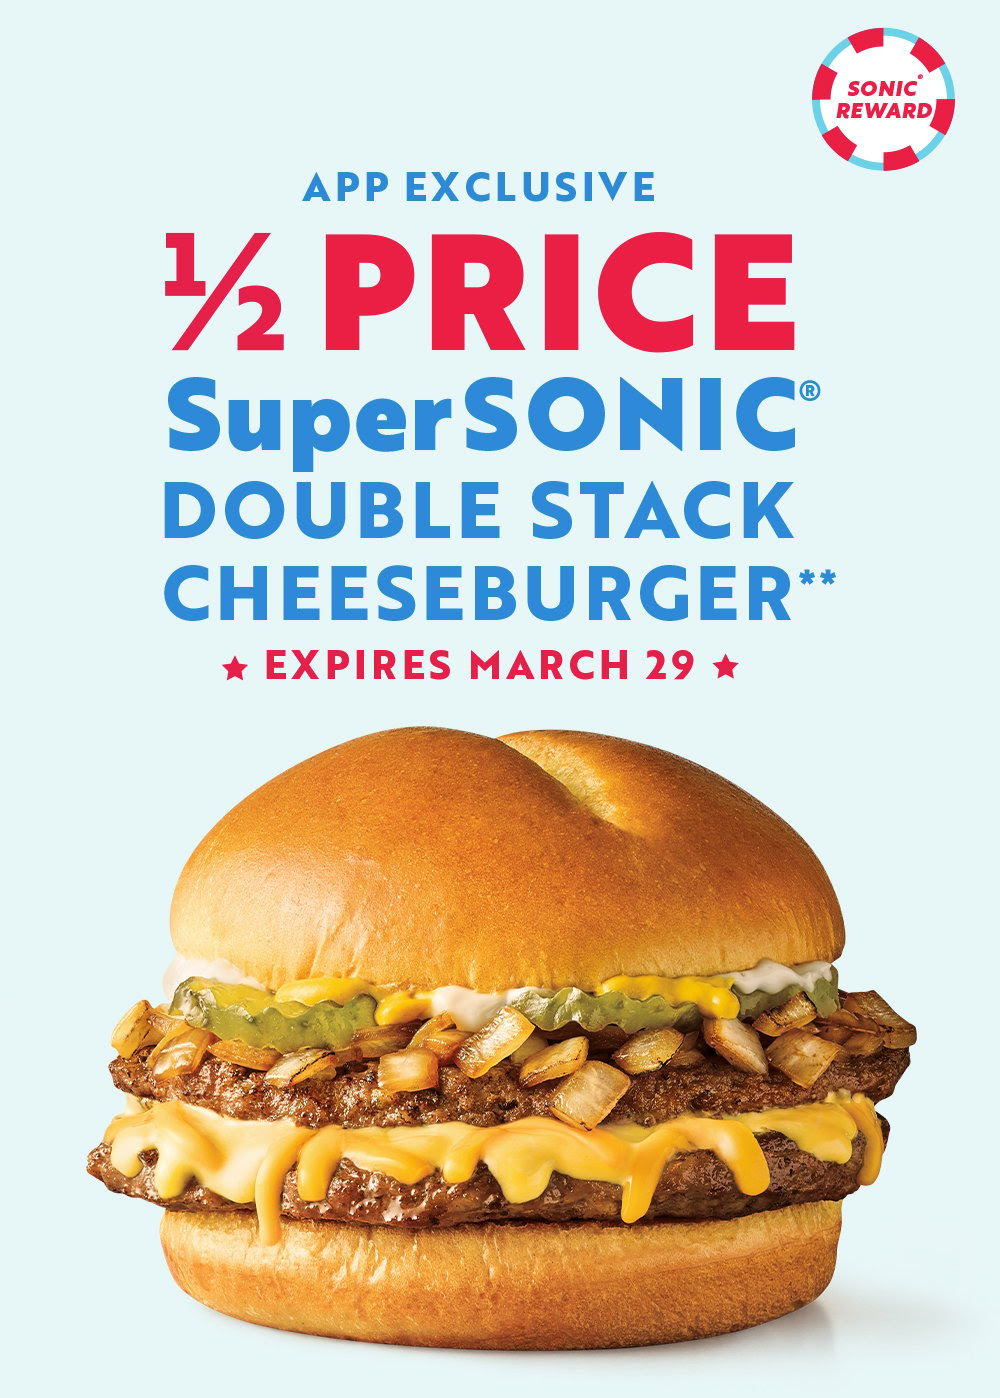 1/2 Price SuperSONIC Double Stack Cheeseburger - App Reward